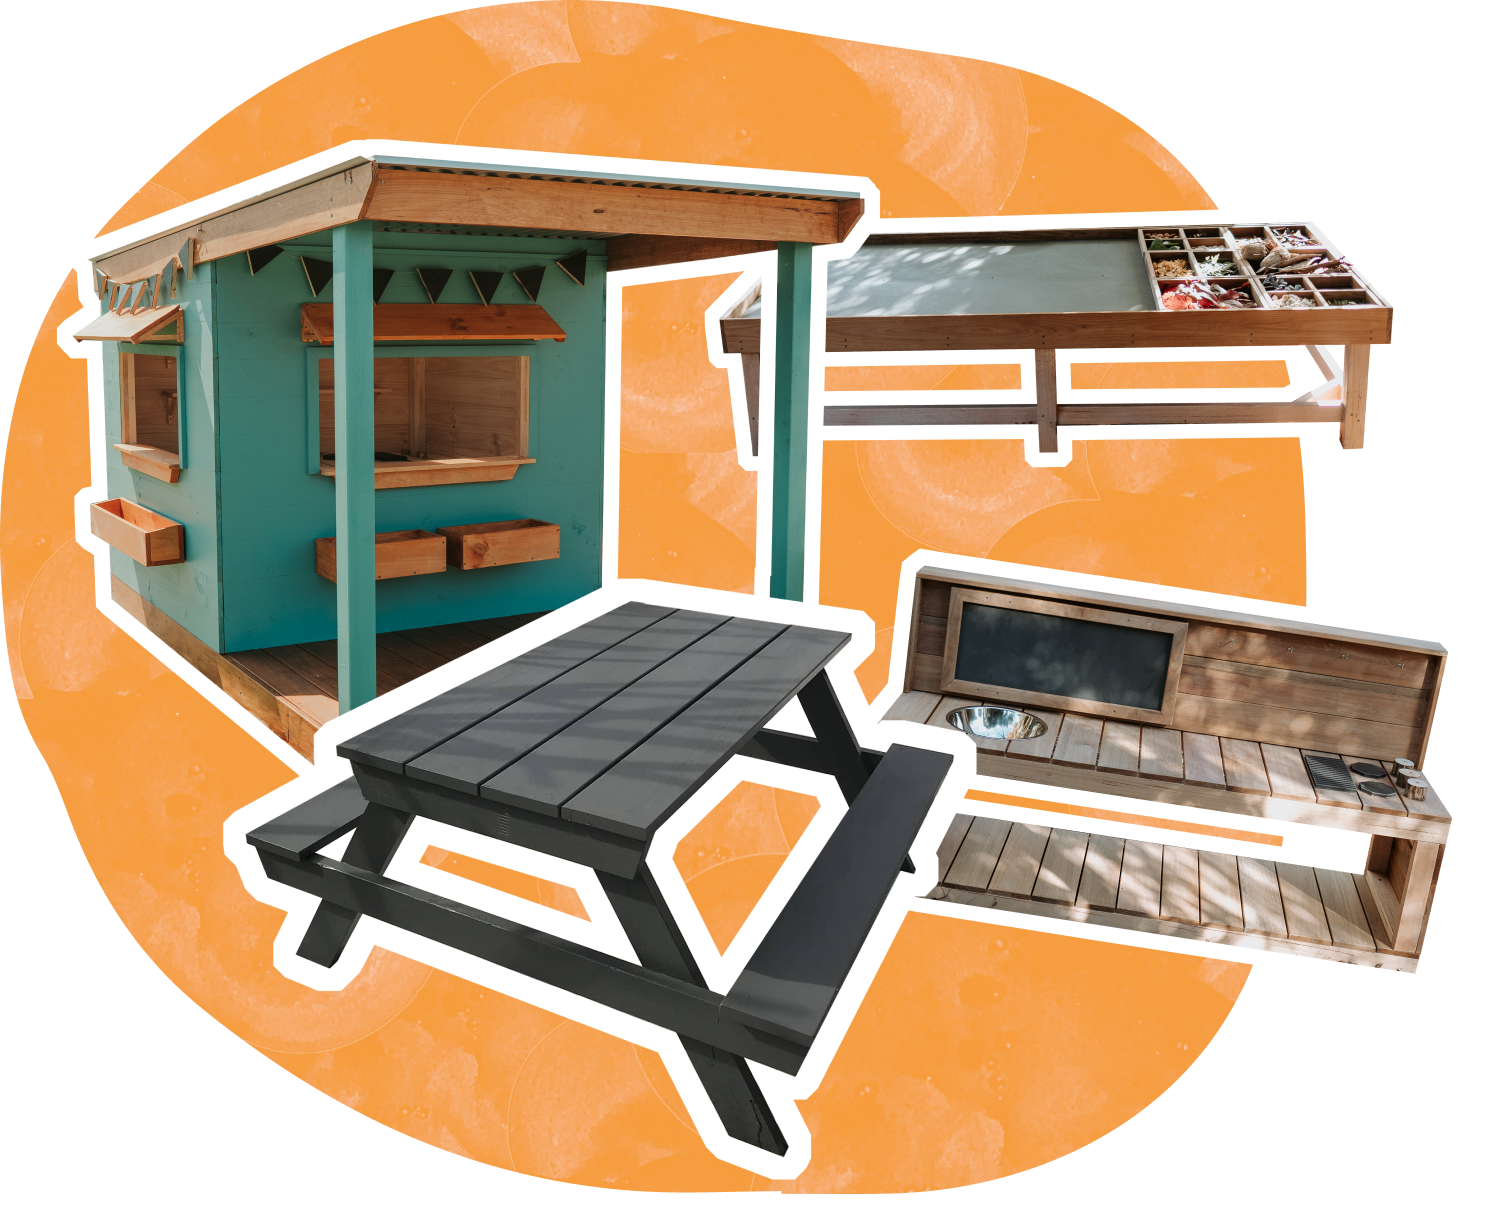 Prize set for Primary school: a Cubby house, a exploration table, a mud kitchen, and a Picnic Table